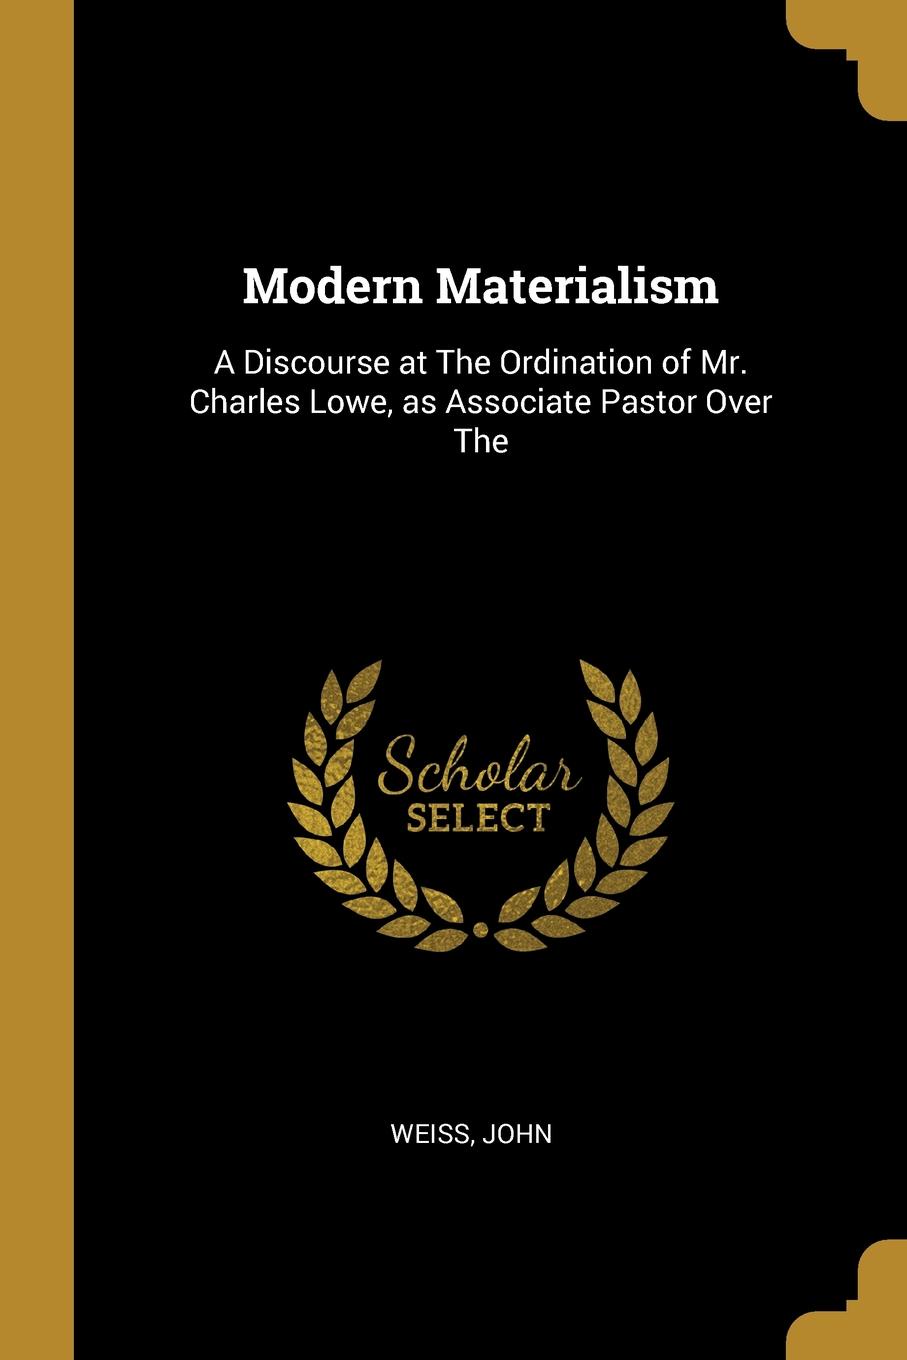 Modern Materialism. A Discourse at The Ordination of Mr. Charles Lowe, as Associate Pastor Over The